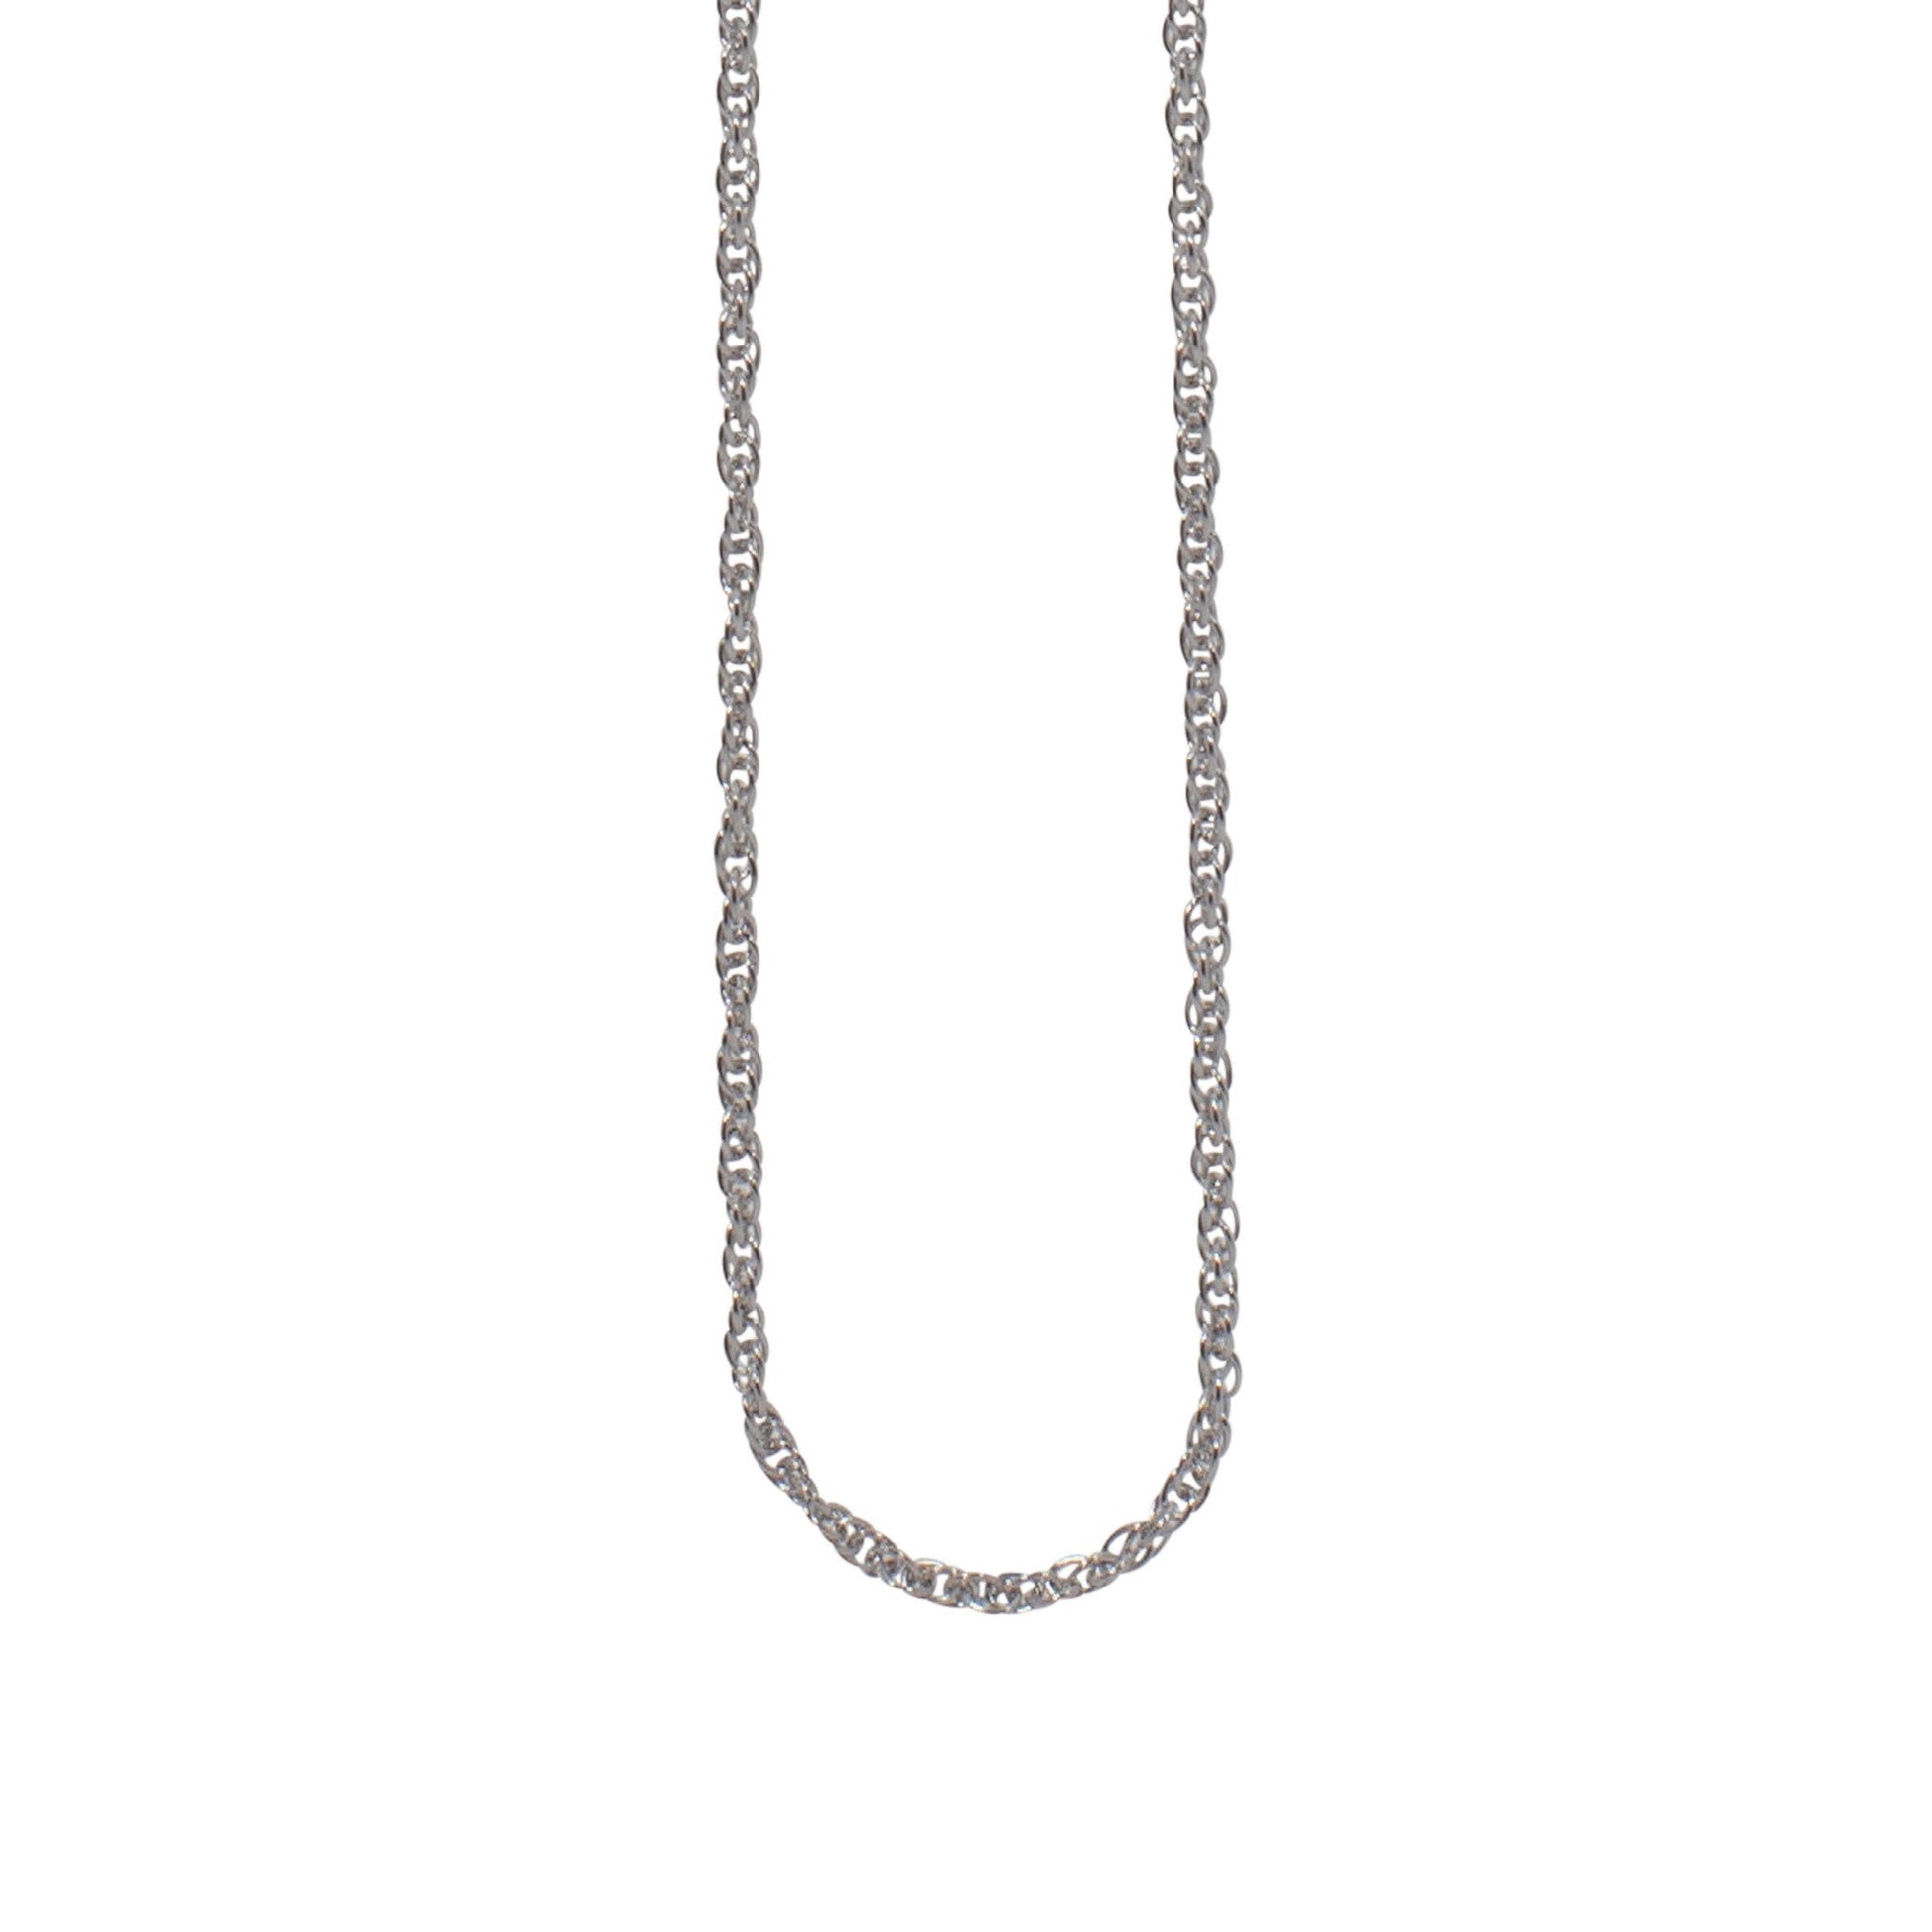 A 16" 1mm french rope chain displayed on a neutral white background.